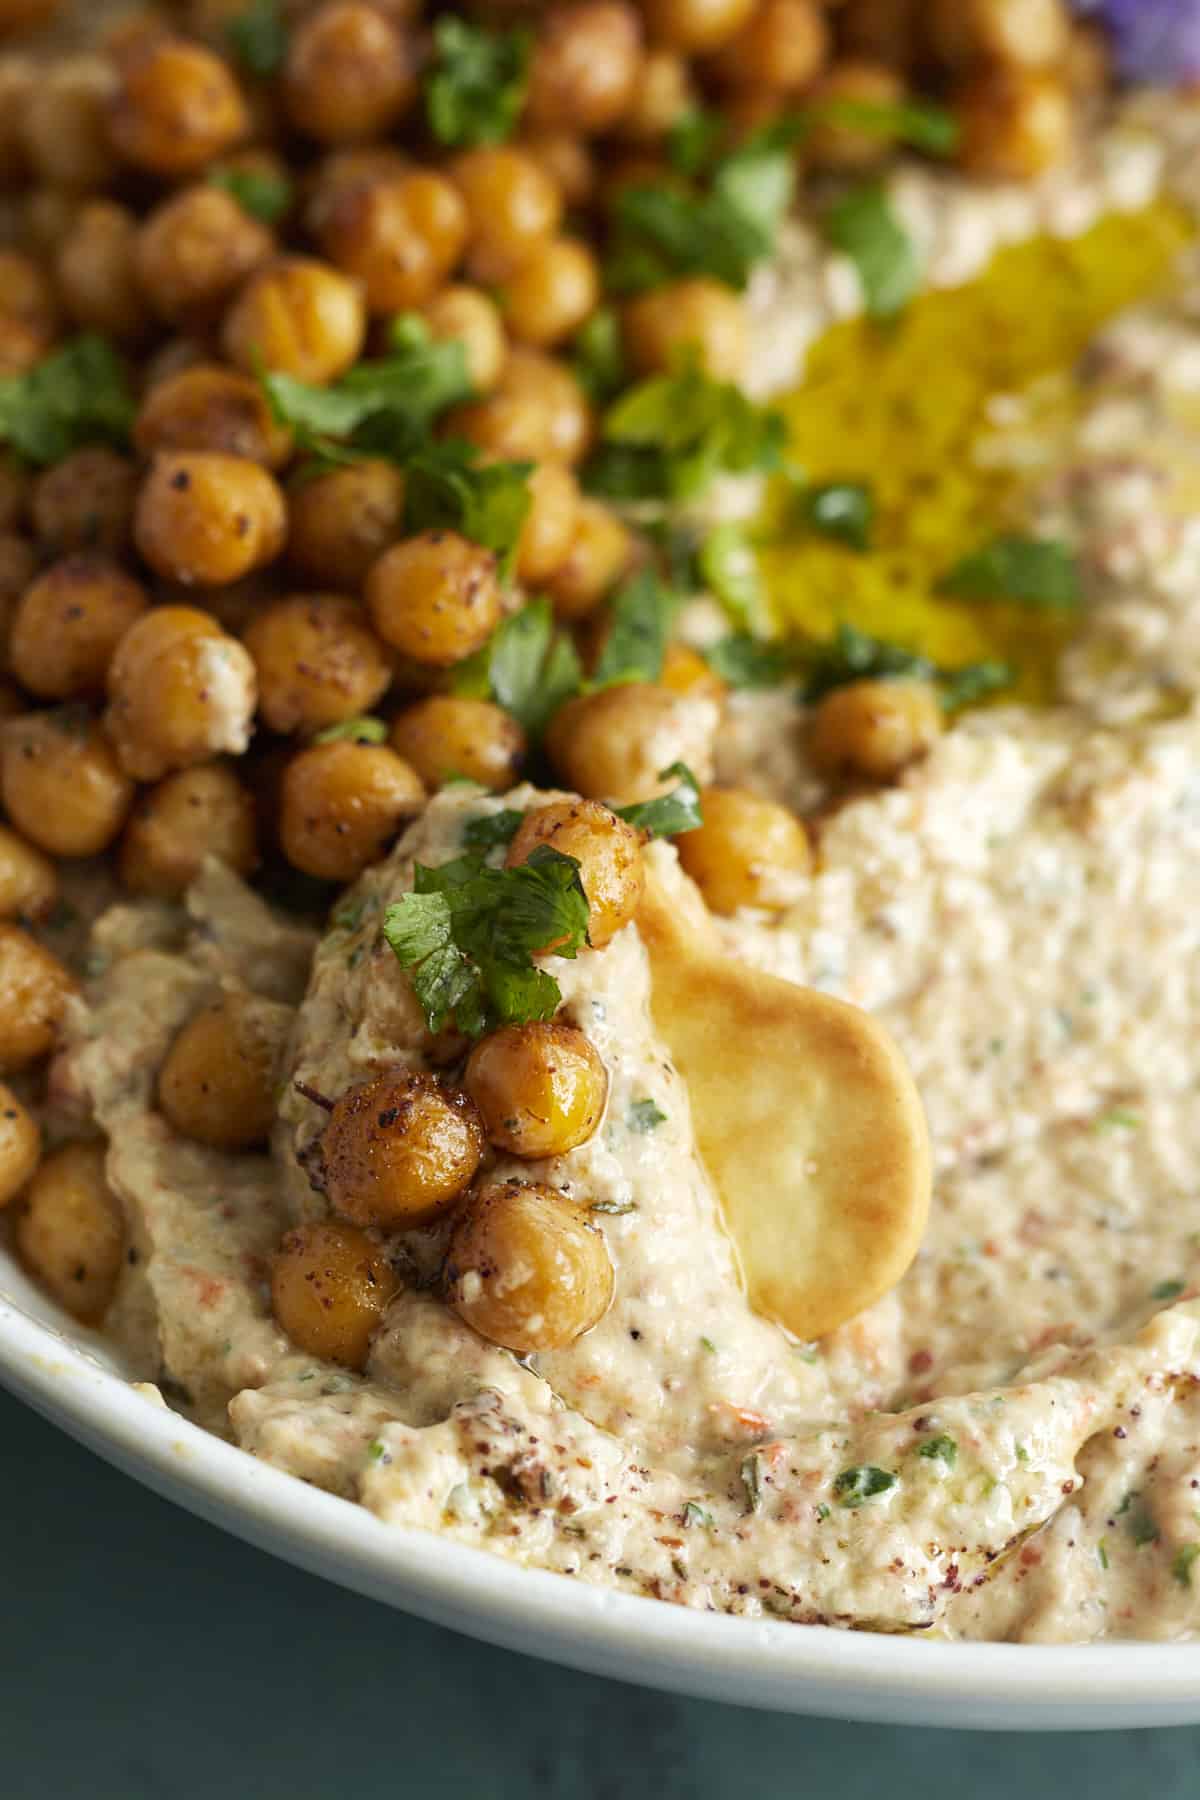 close up image of a cracker scooping up baba ganoush topped with crispy chickpeas